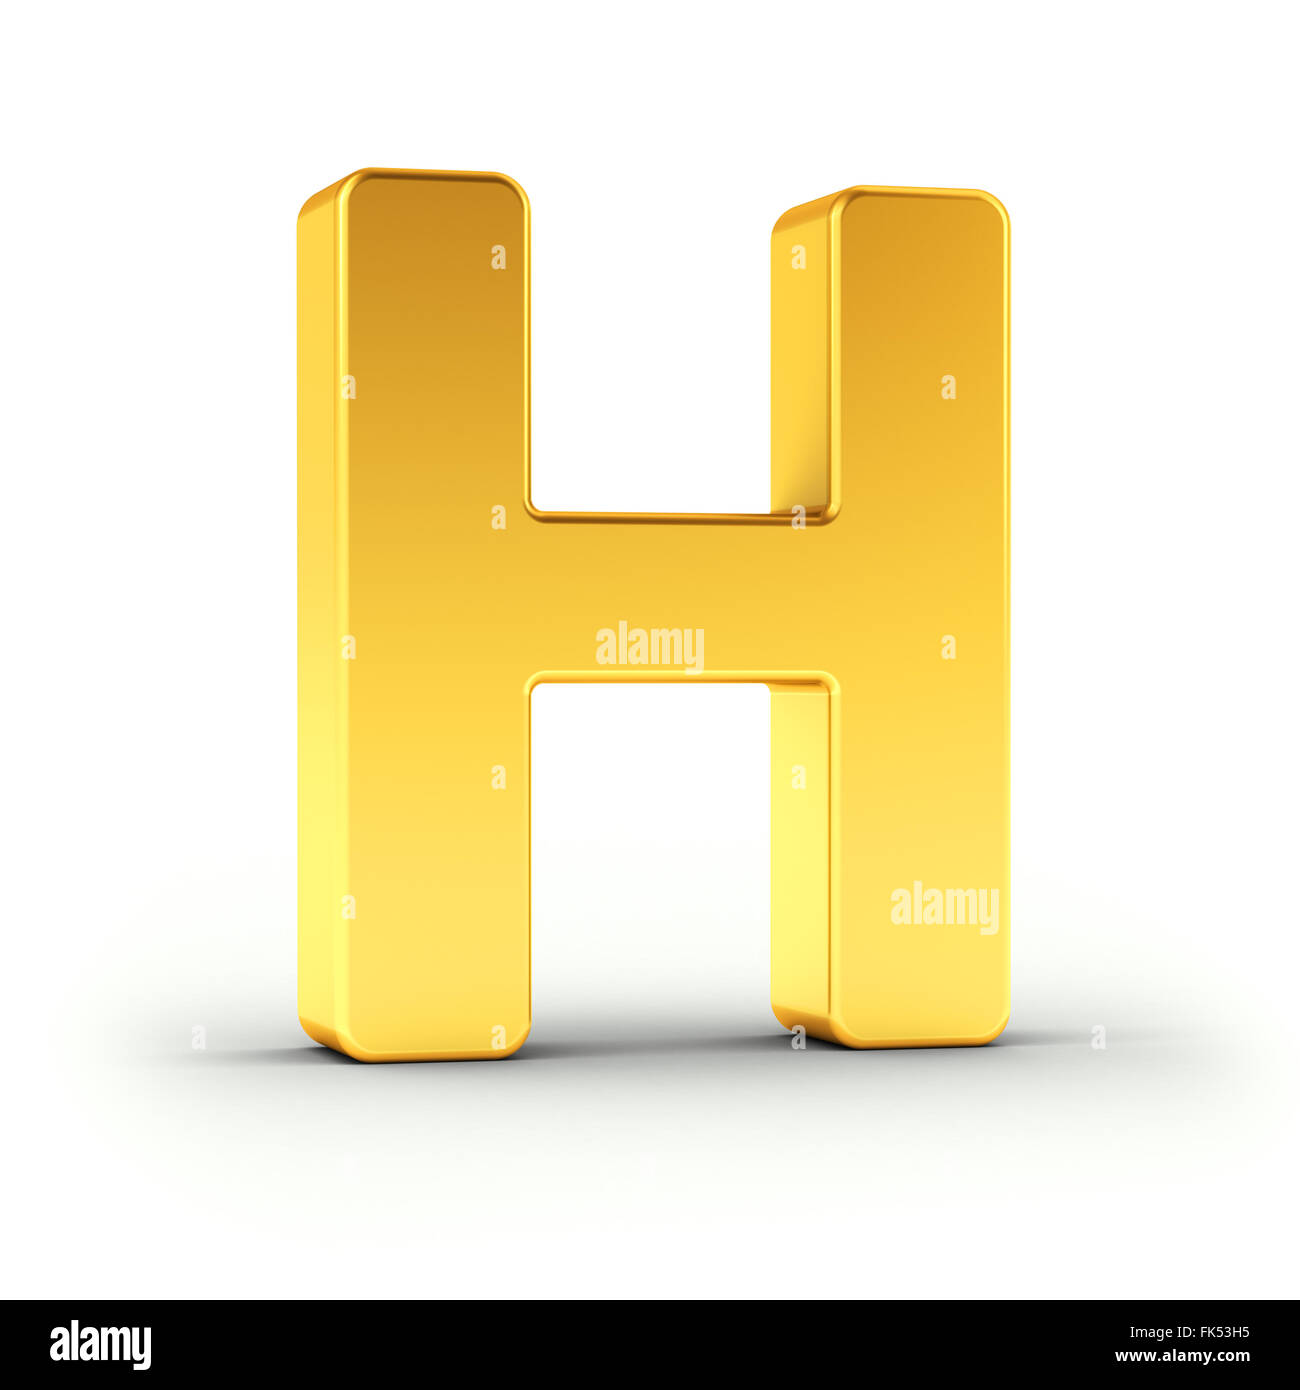 The Letter H as a polished golden object Stock Photo